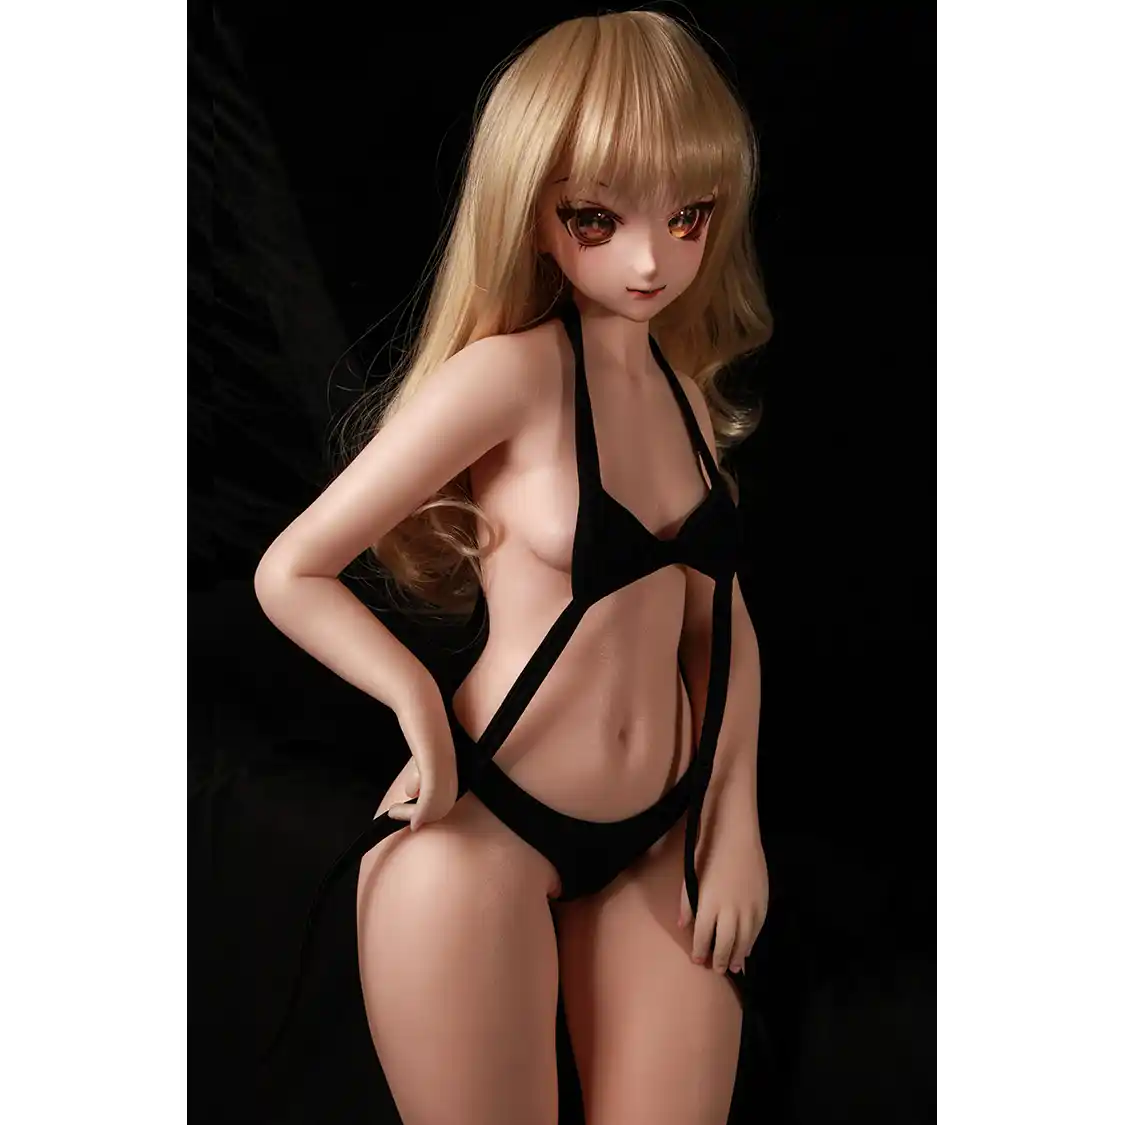 2ft 60cm anime style female mini silicone sex doll with medium breasts, fair skin and a fit athletic body in a black bikini.